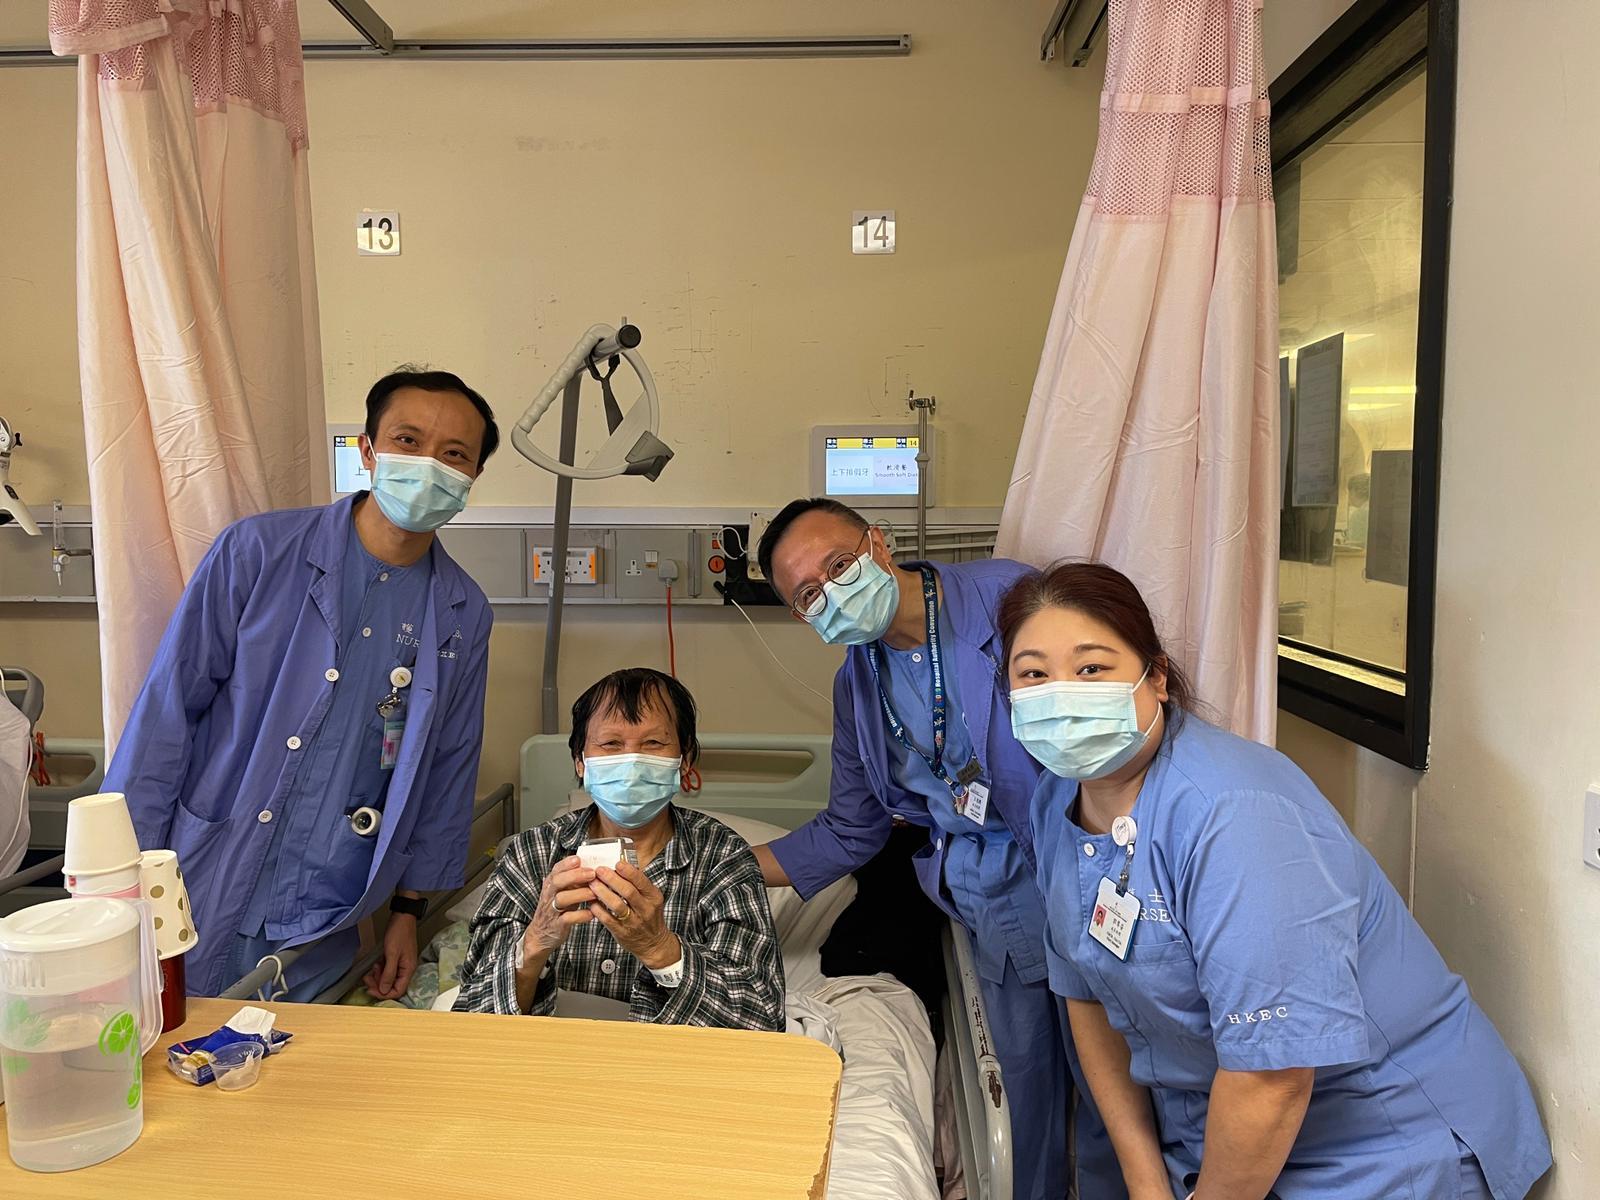 Mid-Autumn Festival celebration activities are arranged by various clusters of the Hospital Authority. After patients taste "soft mooncakes", they smile and say it smells so good and that the taste resembles traditional mooncakes with egg yolk and lotus seed paste.